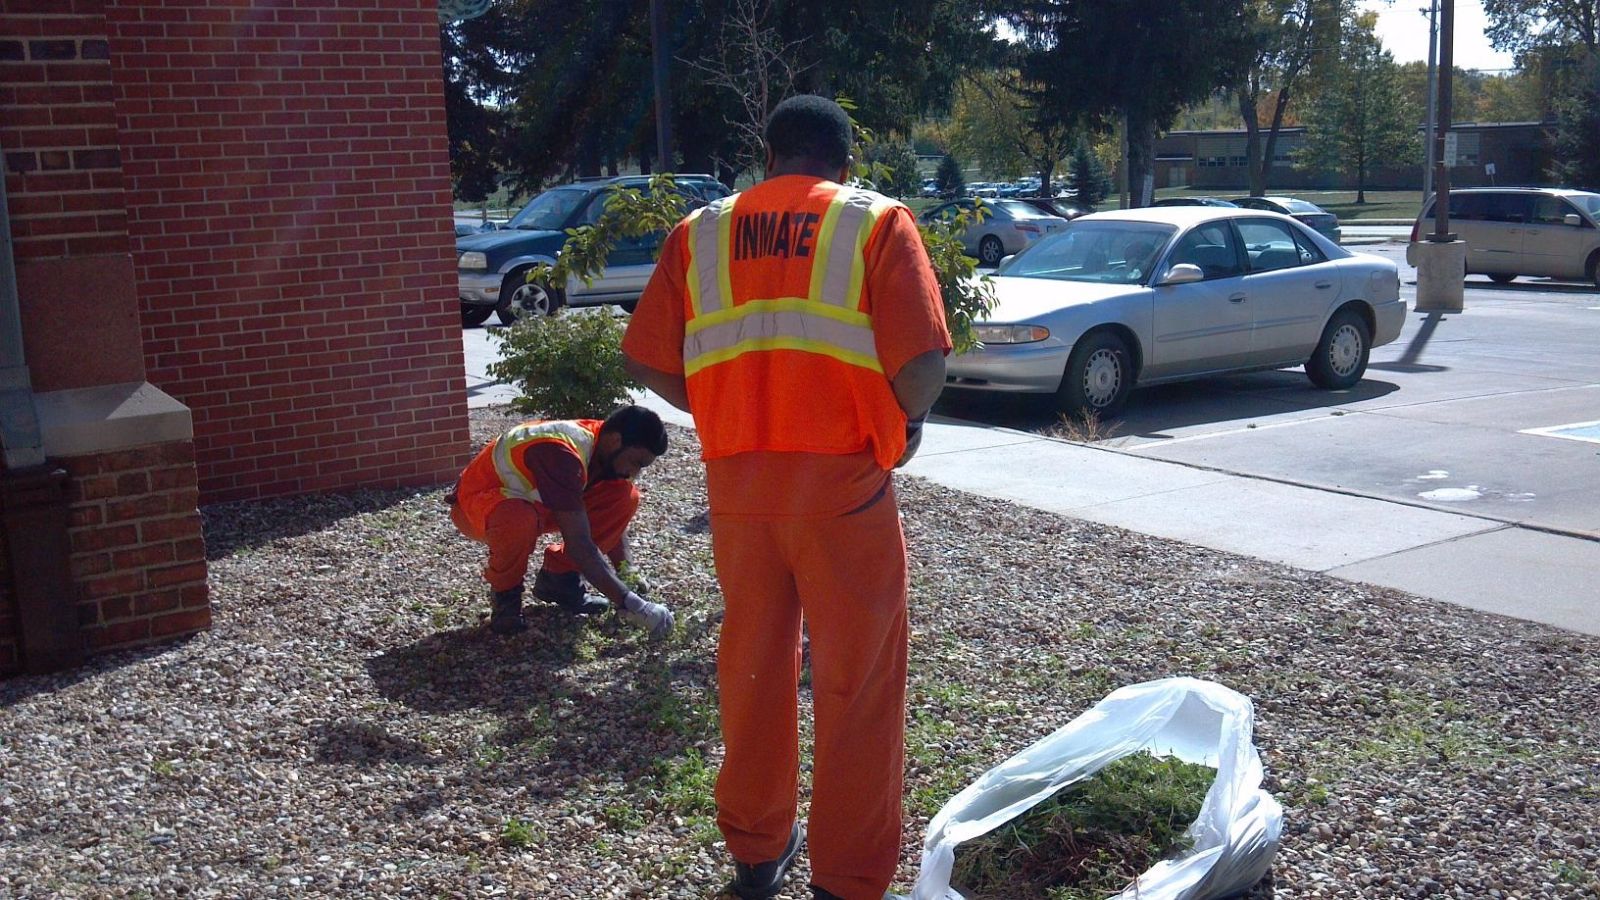 Inmates cleaning up and collecting weeds on courthouse lawn